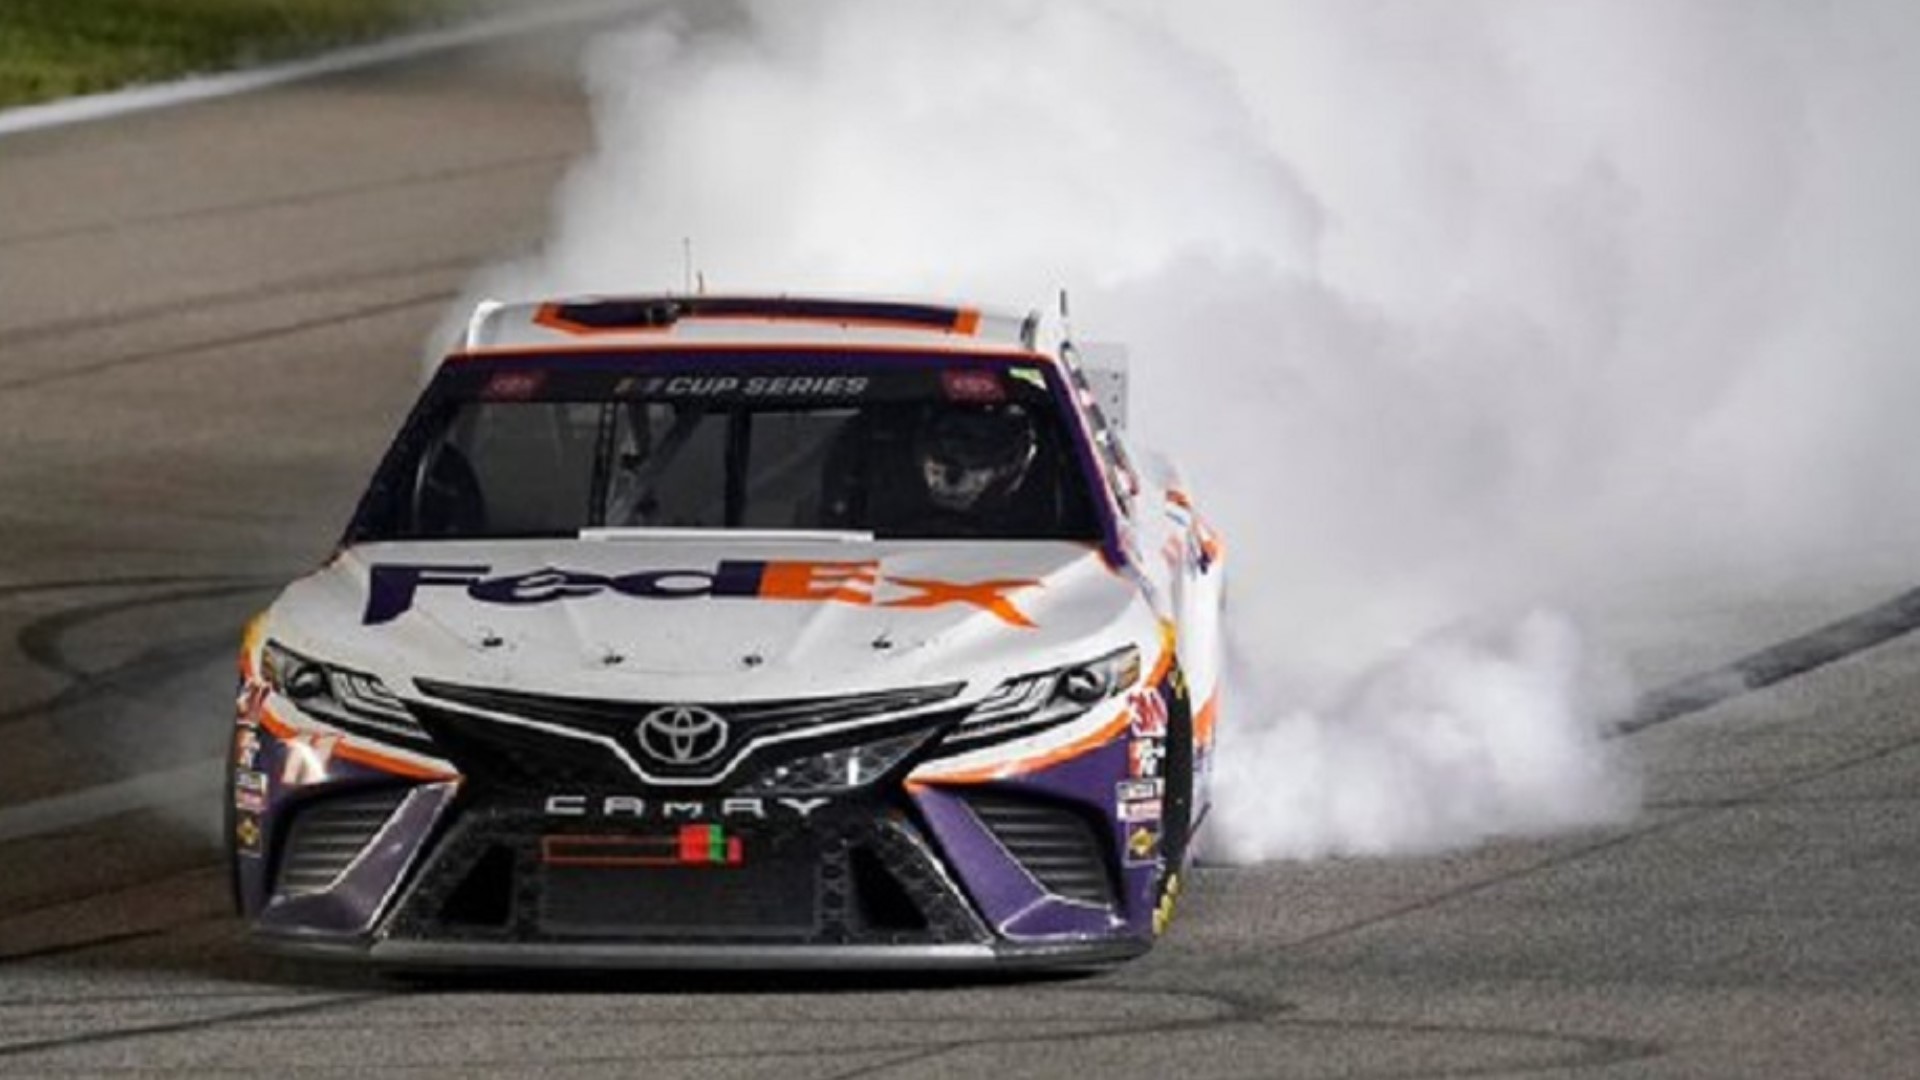 NASCAR driver Denny Hamlin is honoring those hurt and killed during a mass shooting at an Indianapolis FedEx facility when he hits the Richmond Raceway.